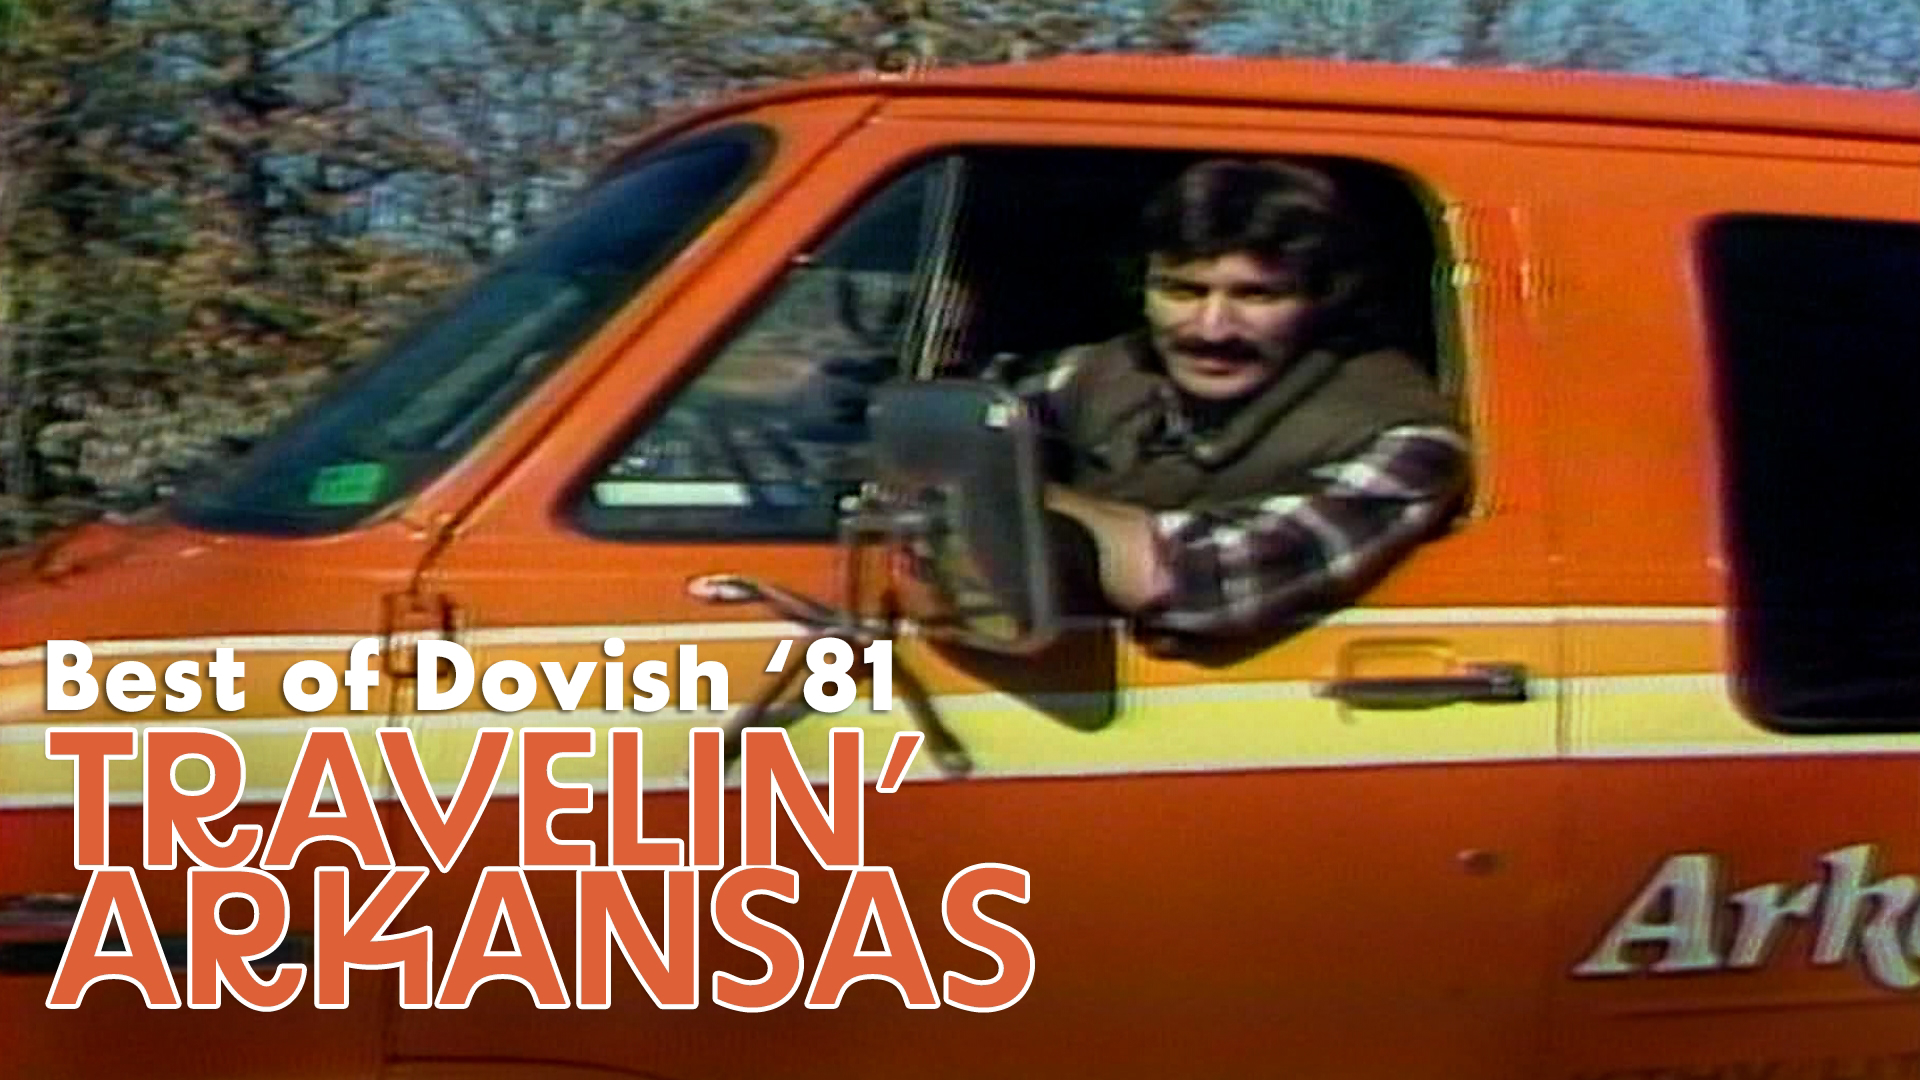 For 25 years, Chuck Dovish made the Travelin' Arkansas series for THV11. Enjoy this special from 1981, featuring swimming holes, apple cider, & the Hat Man of Hope.